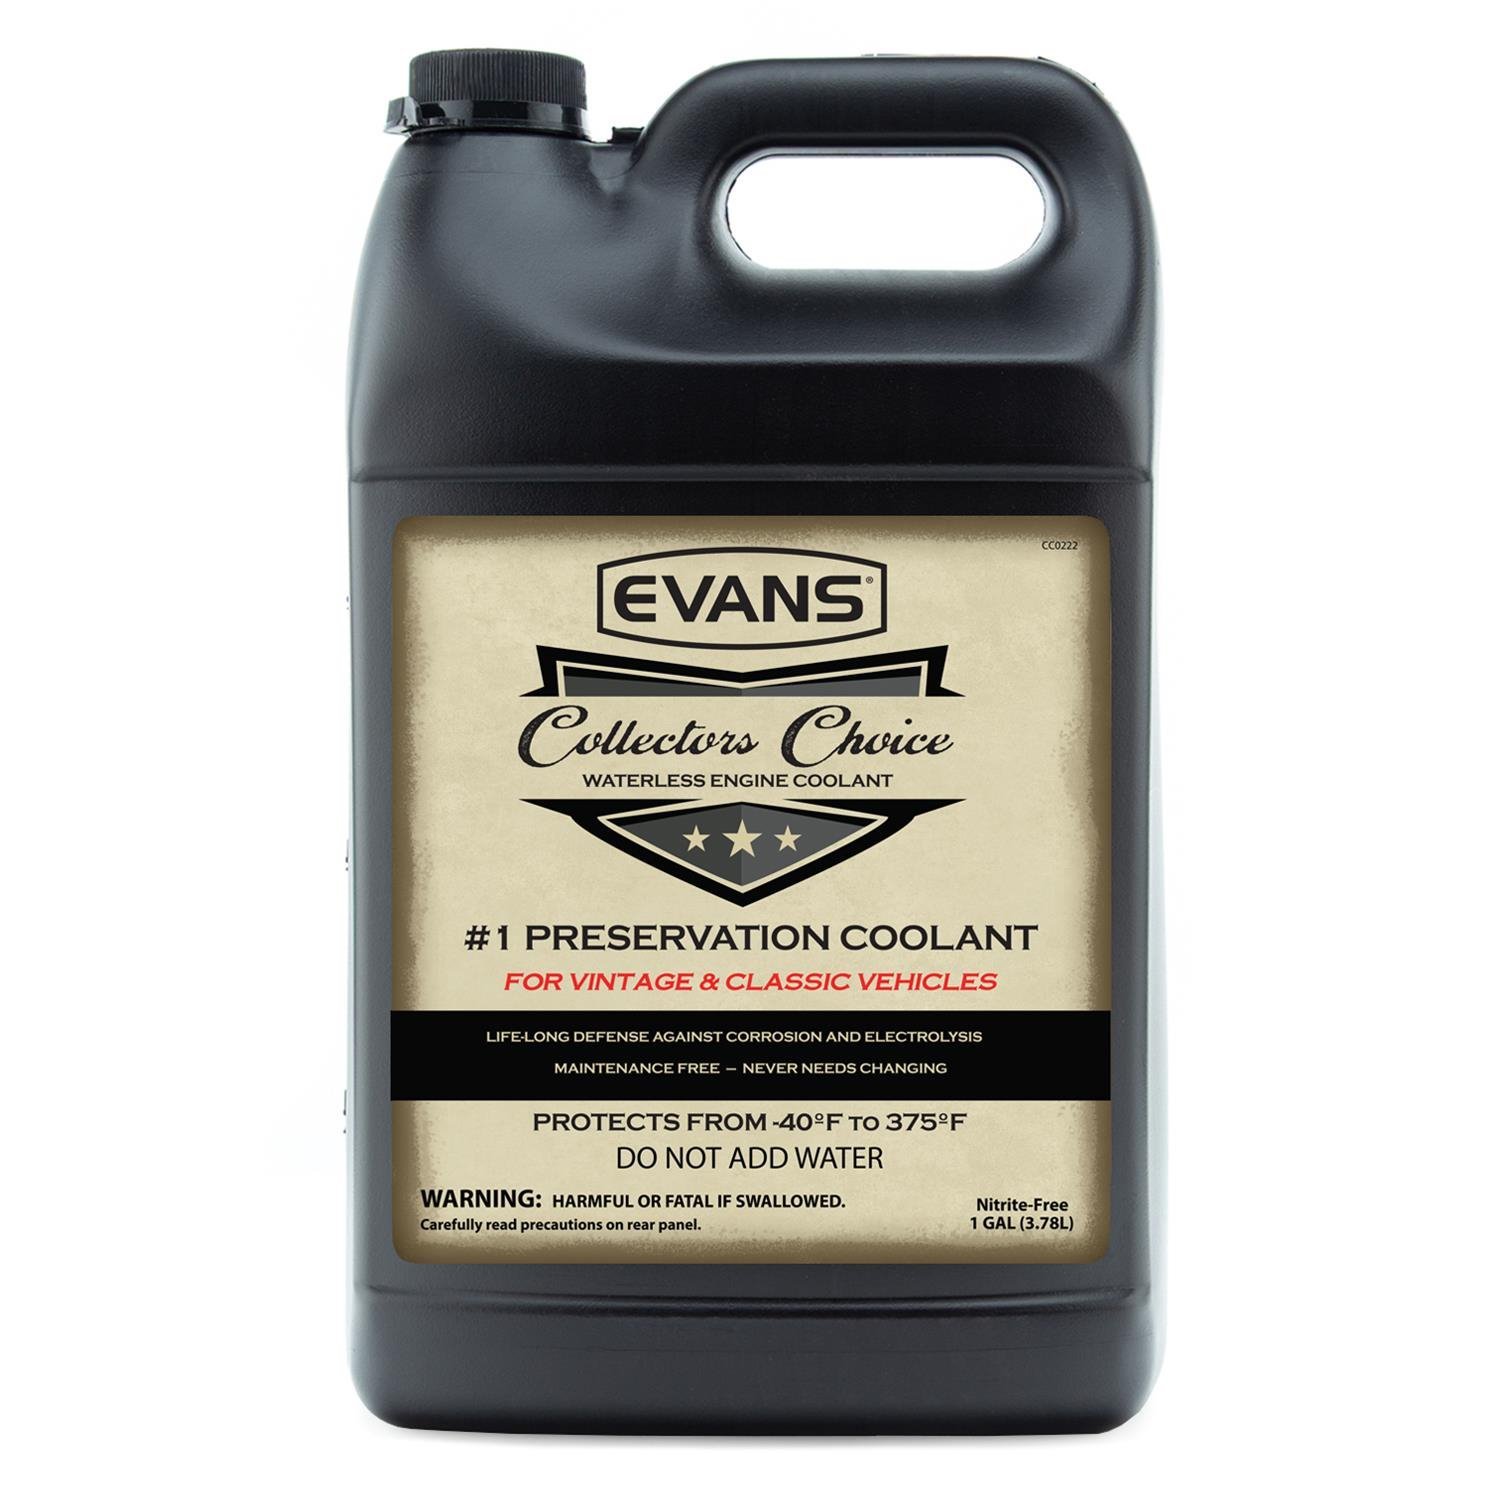 EC31001 Collectors Choice Waterless Engine Coolant